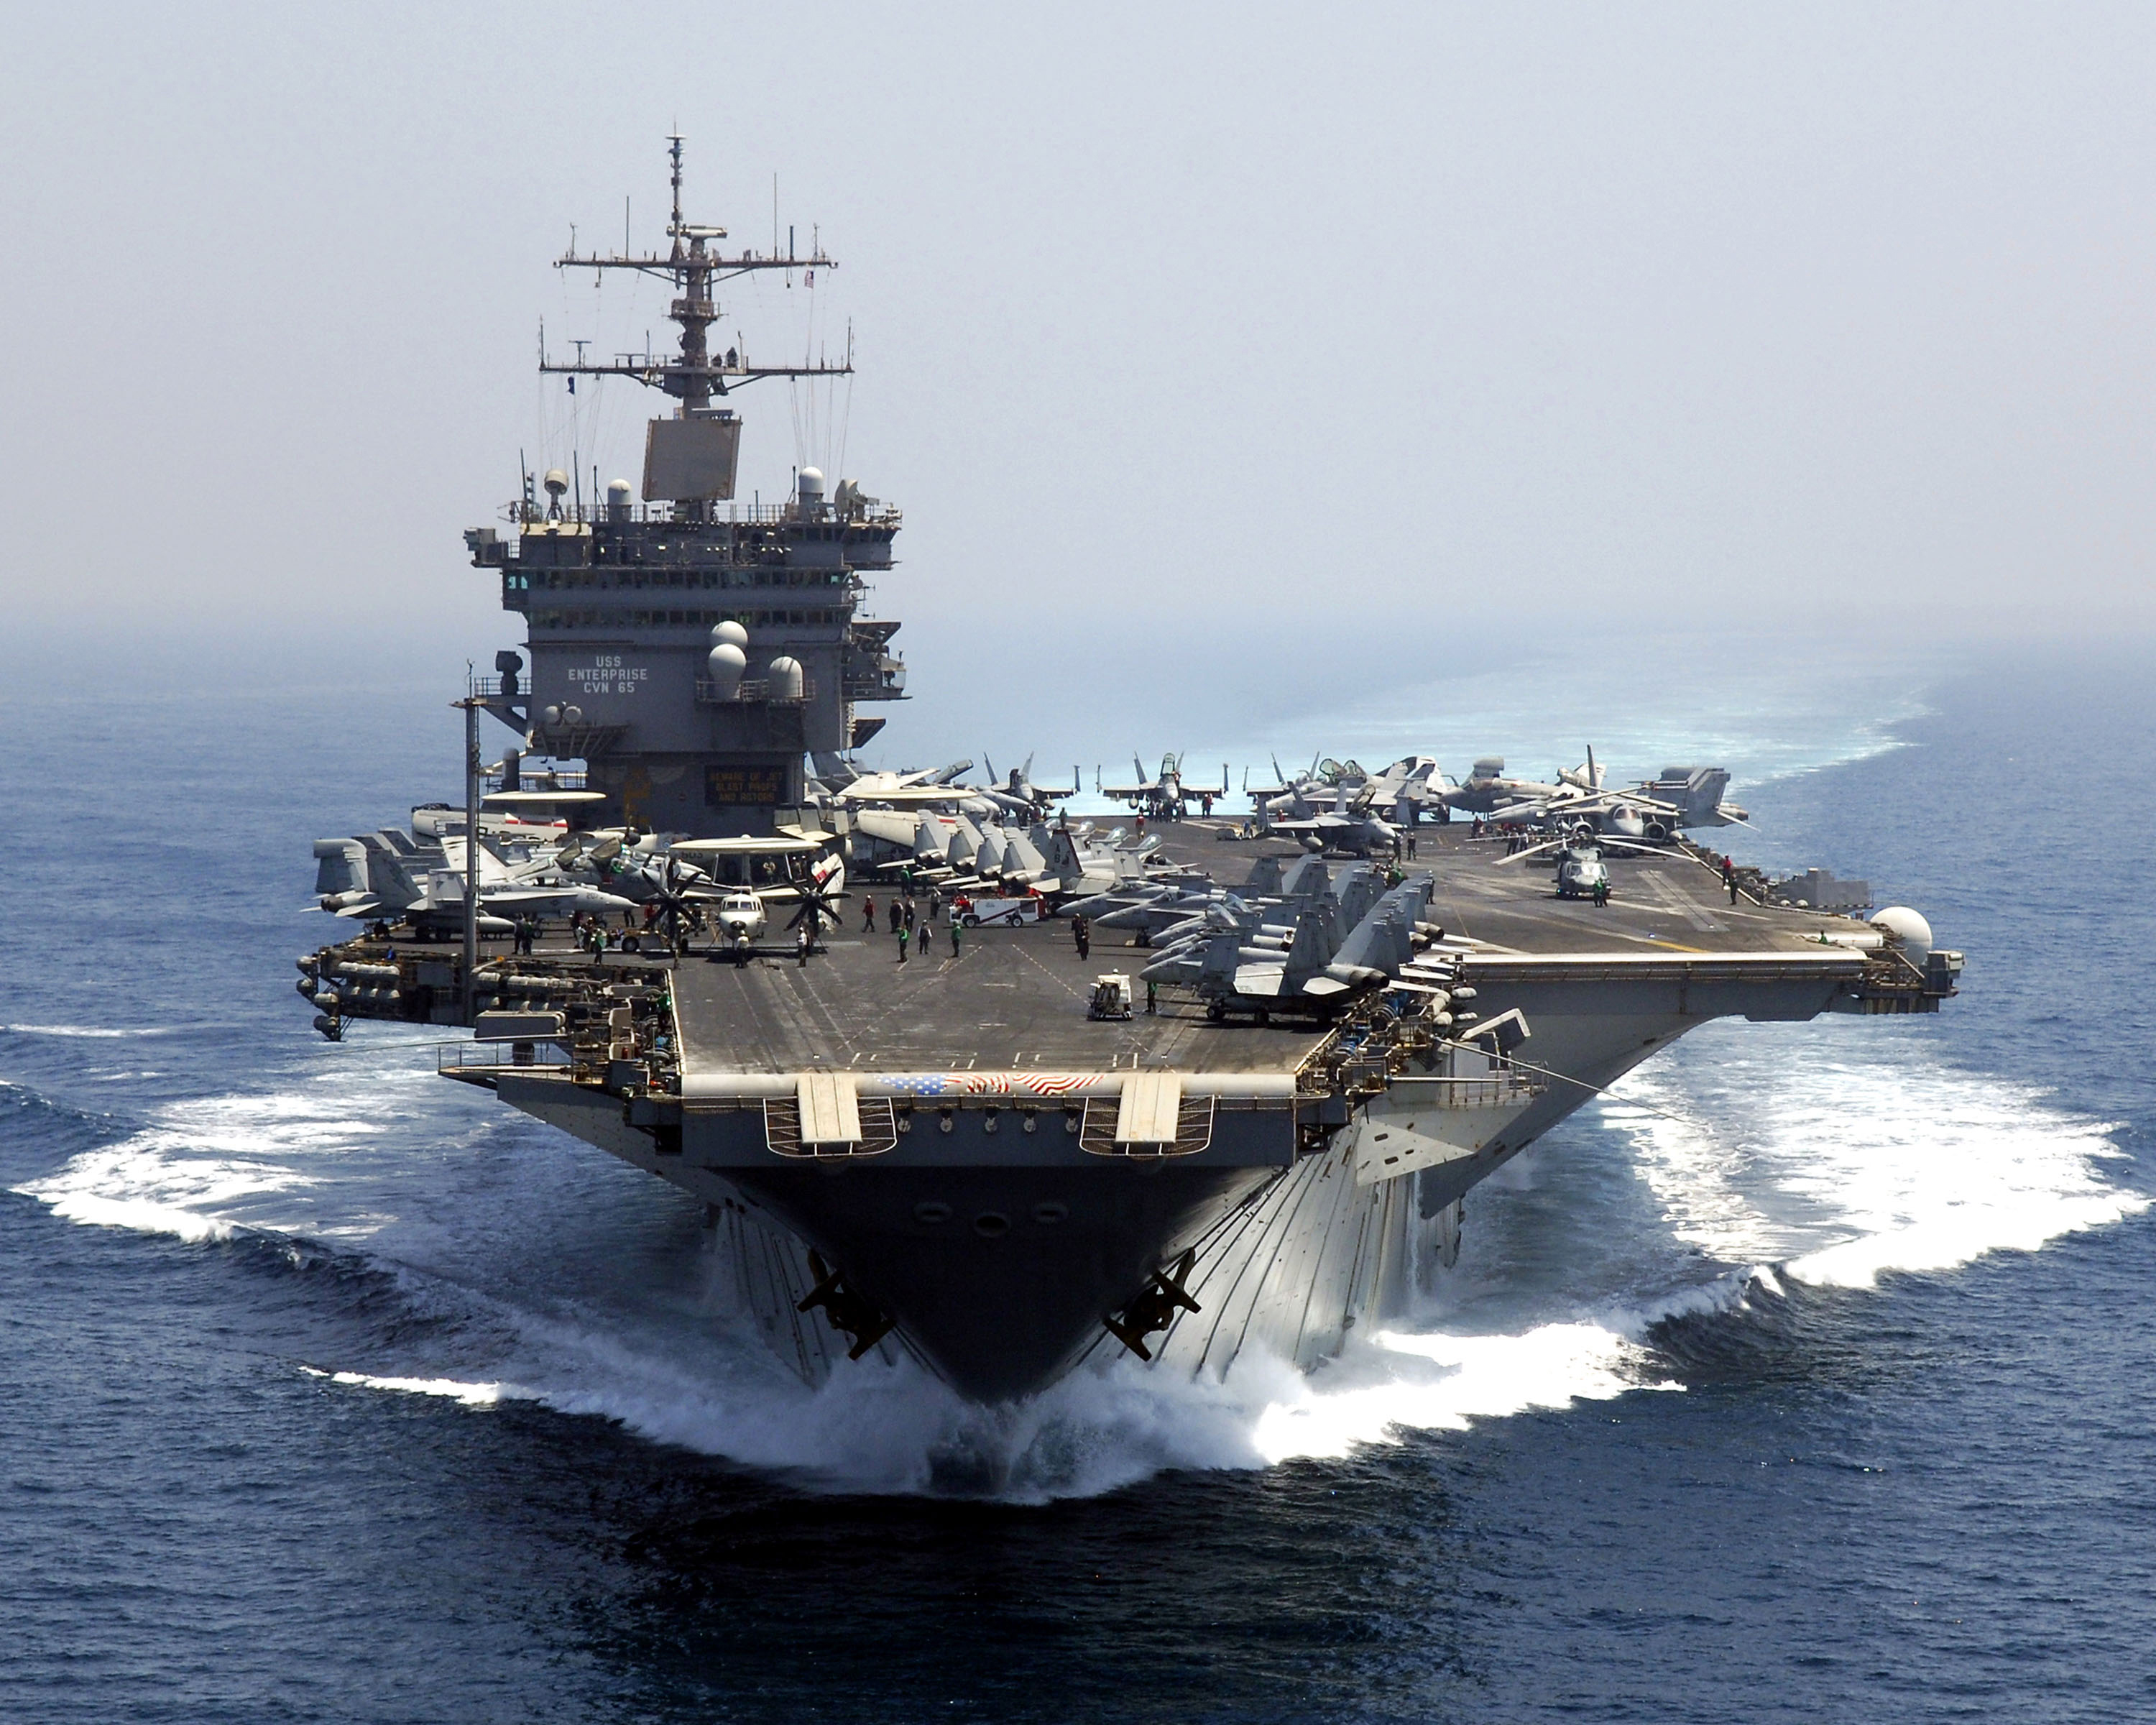 USS Enterprise (CVN-80), a mighty aircraft carrier of the United States Navy.